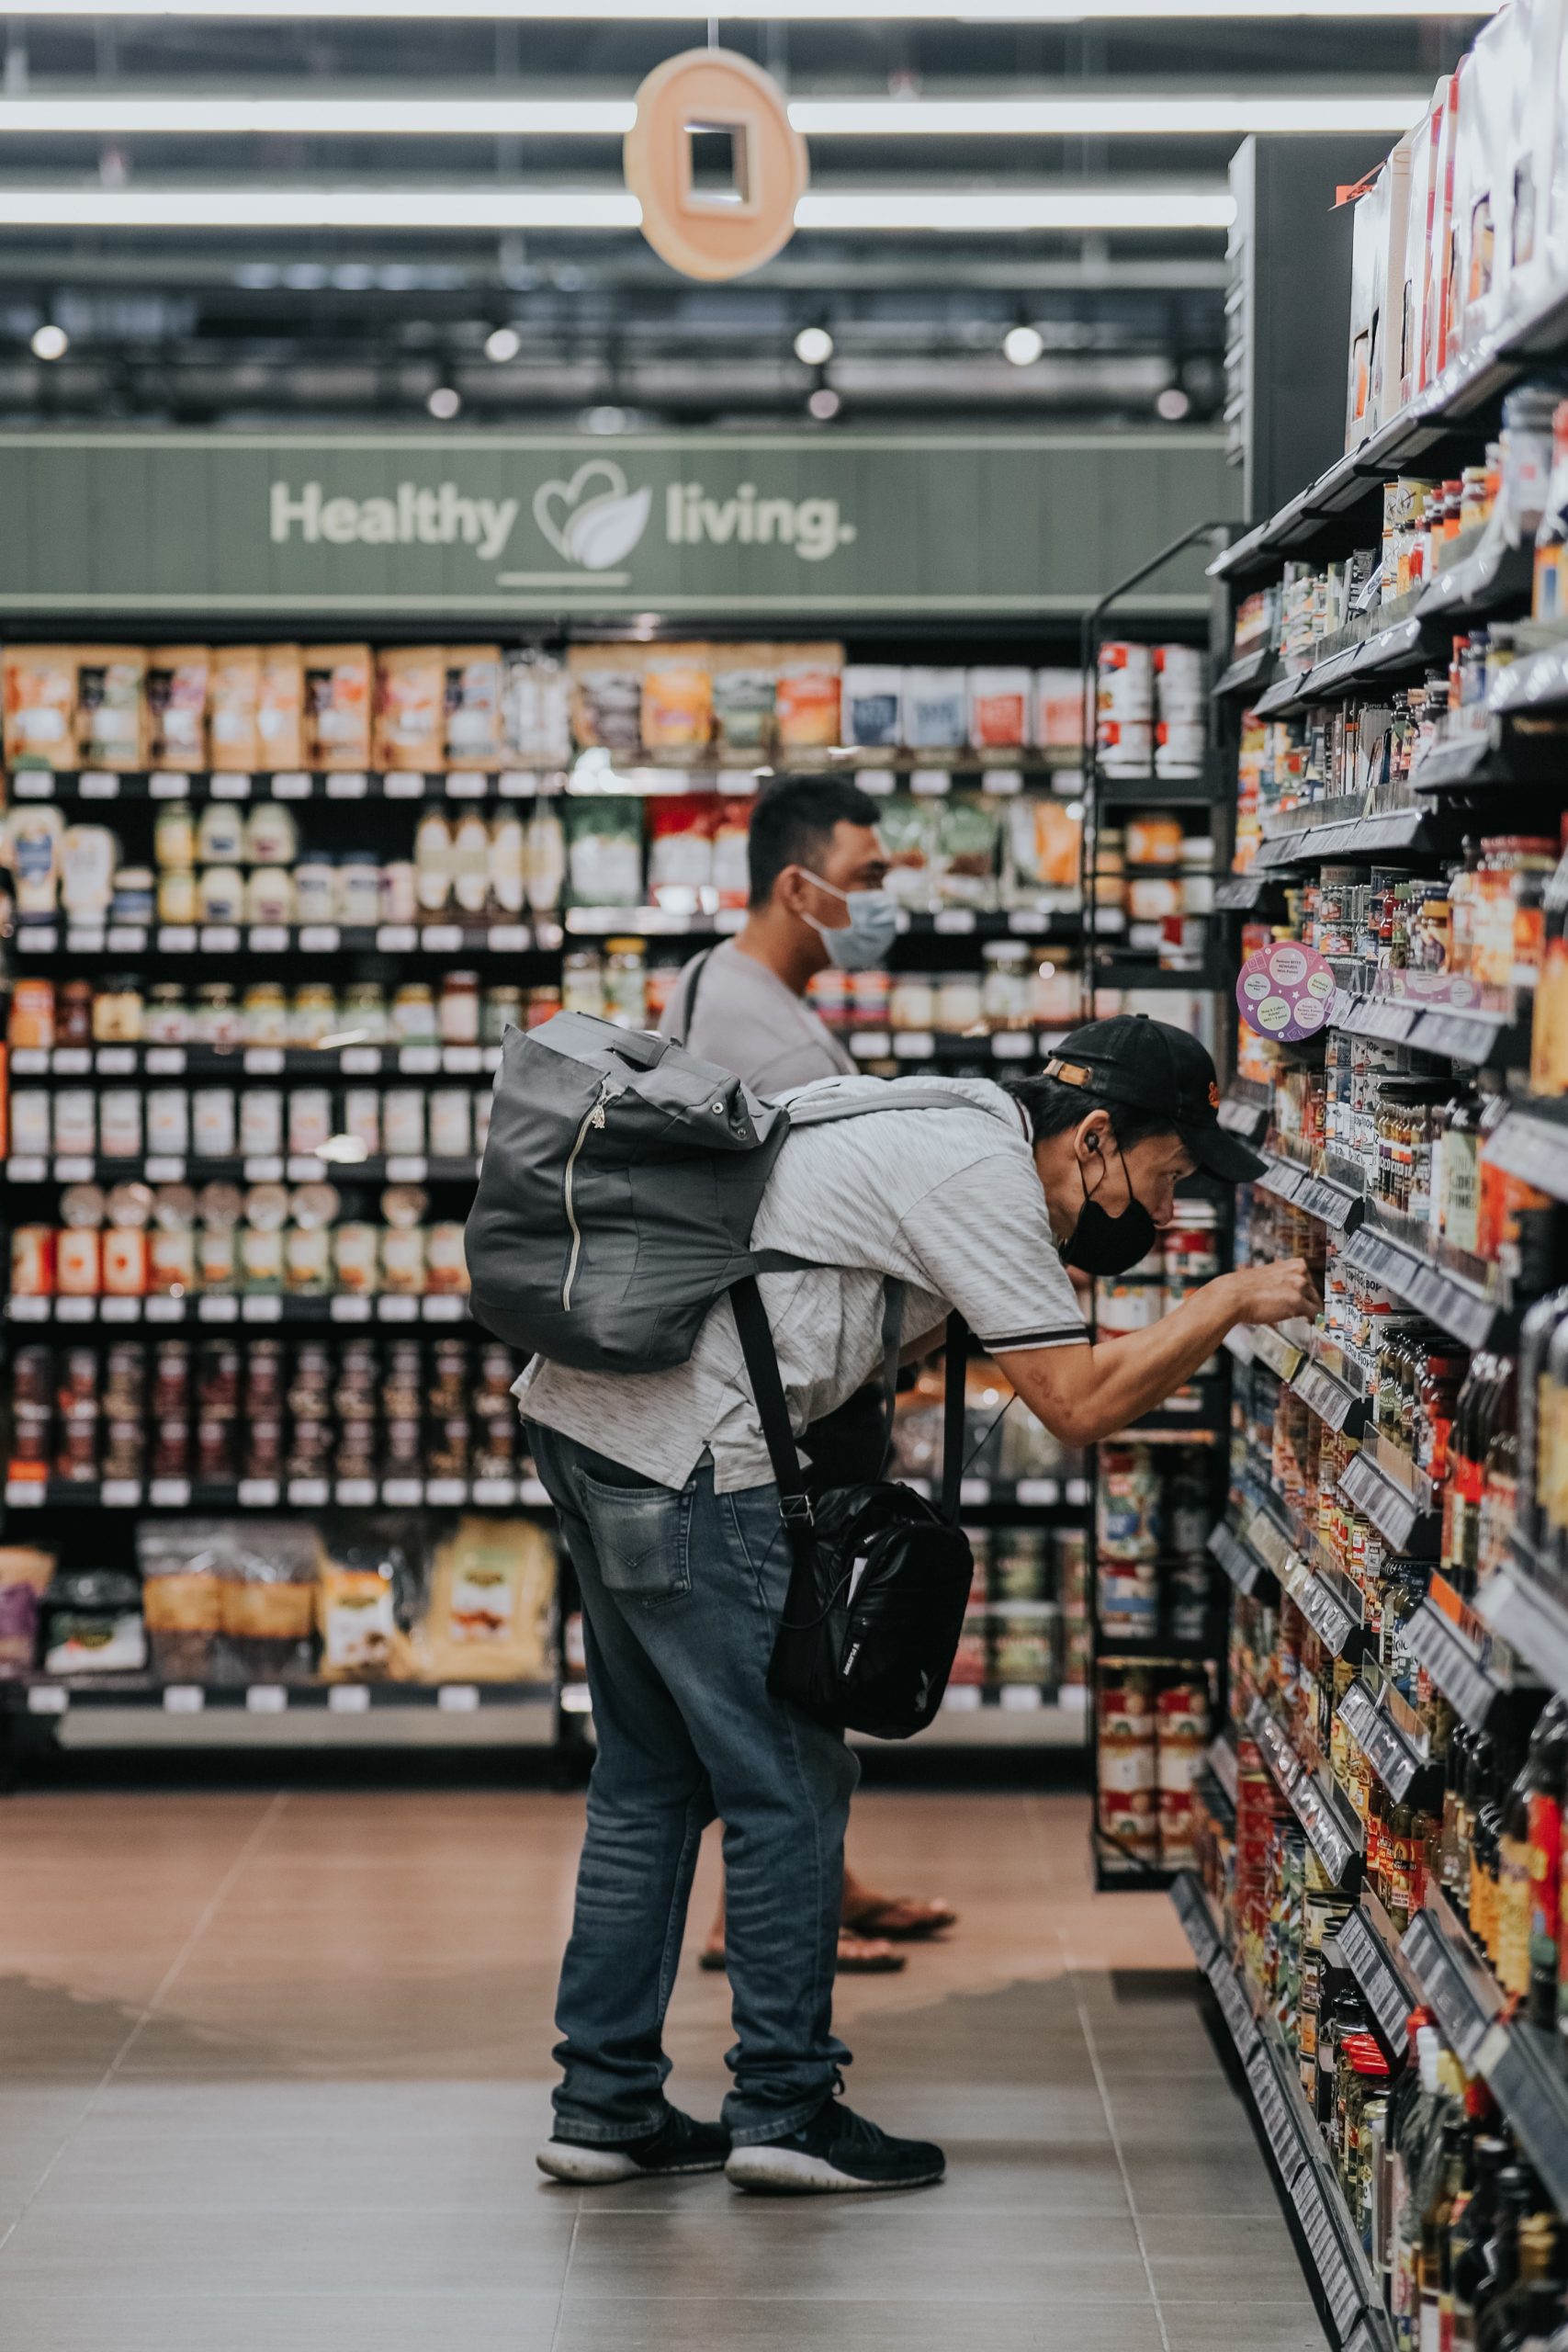 Two men shopping in a grocery store while maintaining social distancing and wearing masks.